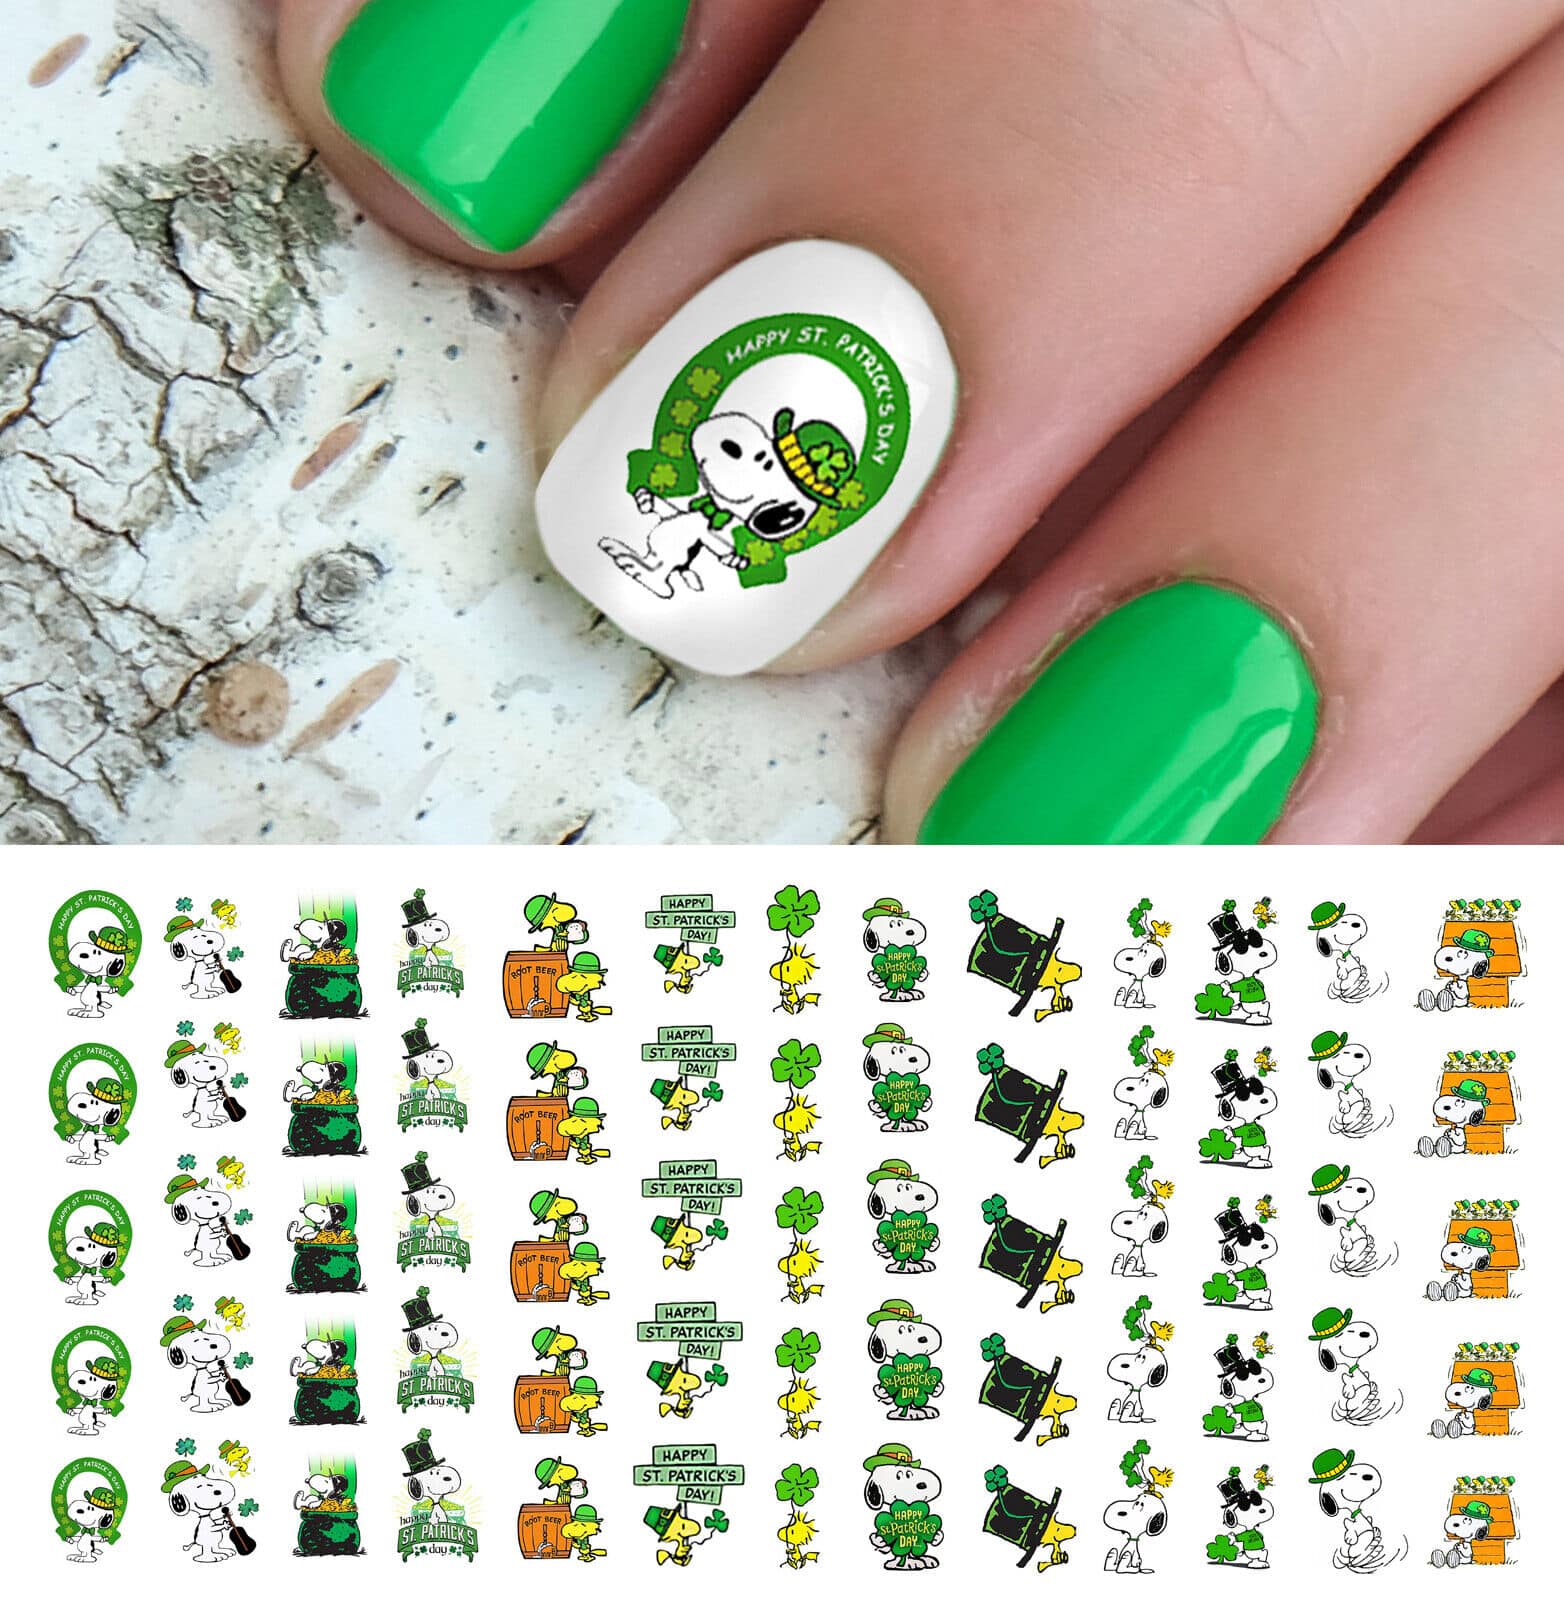 Snoopy Charlie Brown St Patrick's Day - Nail Art Decals - Moon Sugar Decals